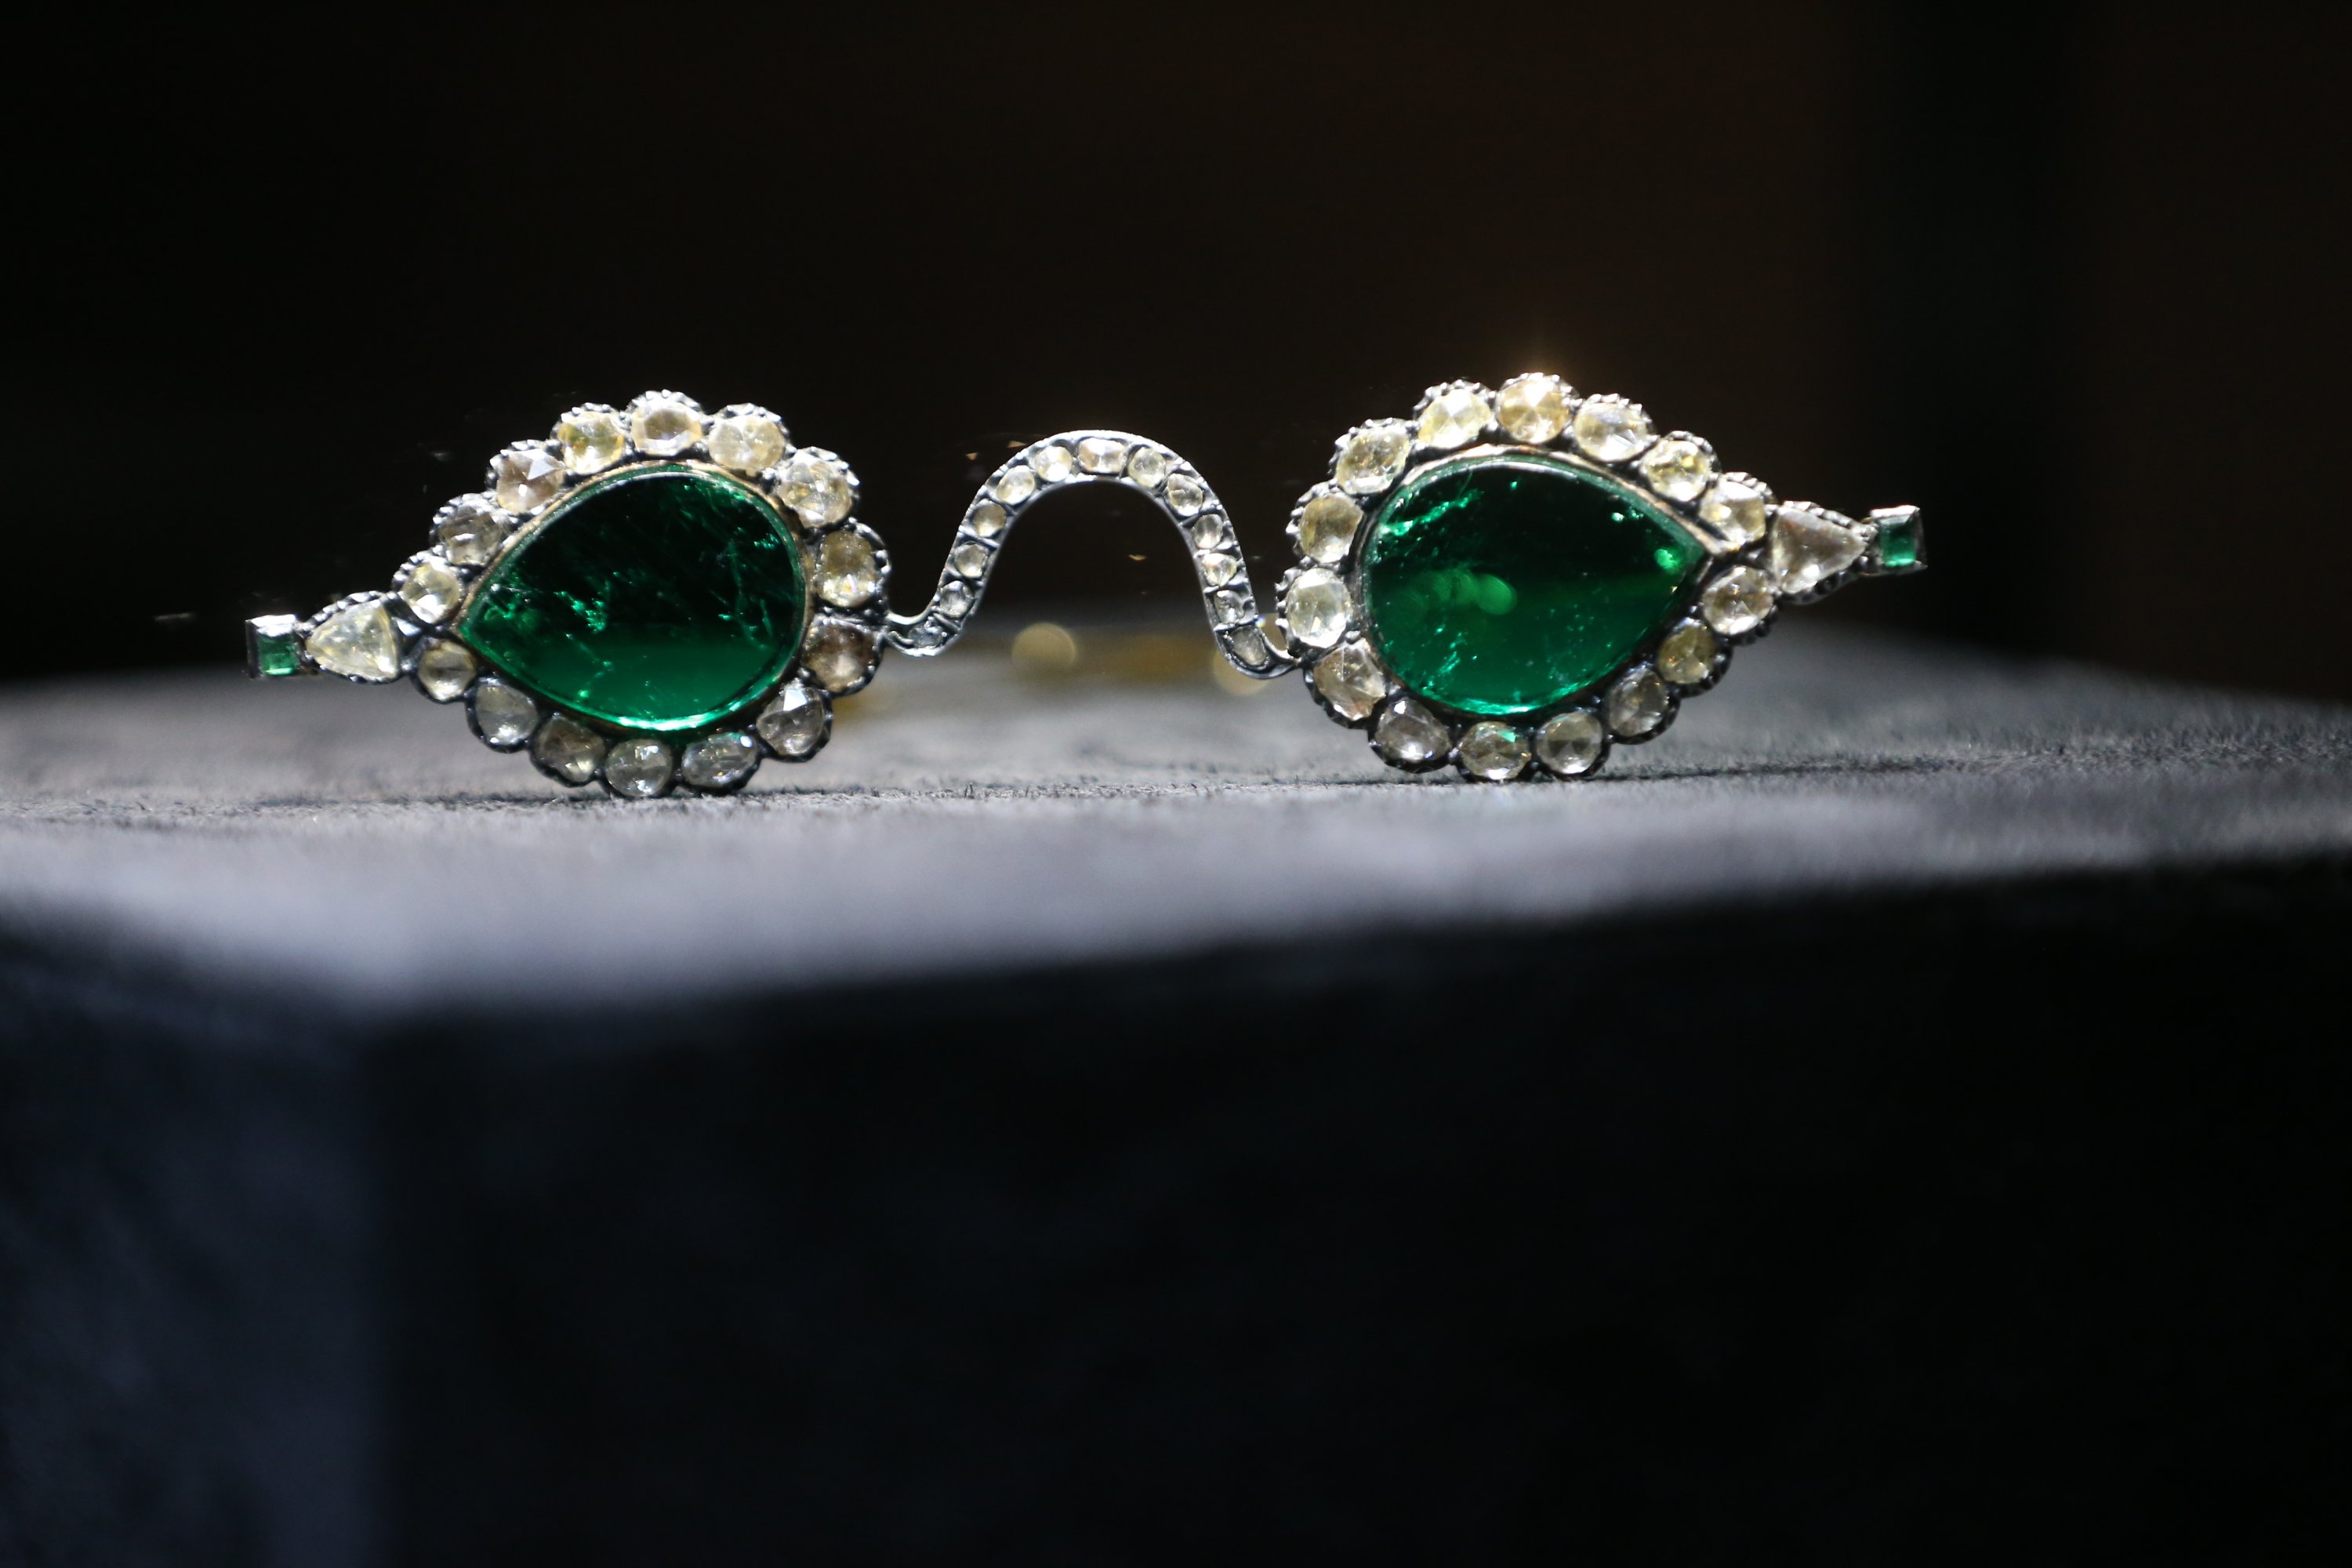 Mughal spectacles from the“Arts of the Islamic World & India” auction, Sotheby’s, London, Britain, Oct. 22, 2021. (AA Photo)